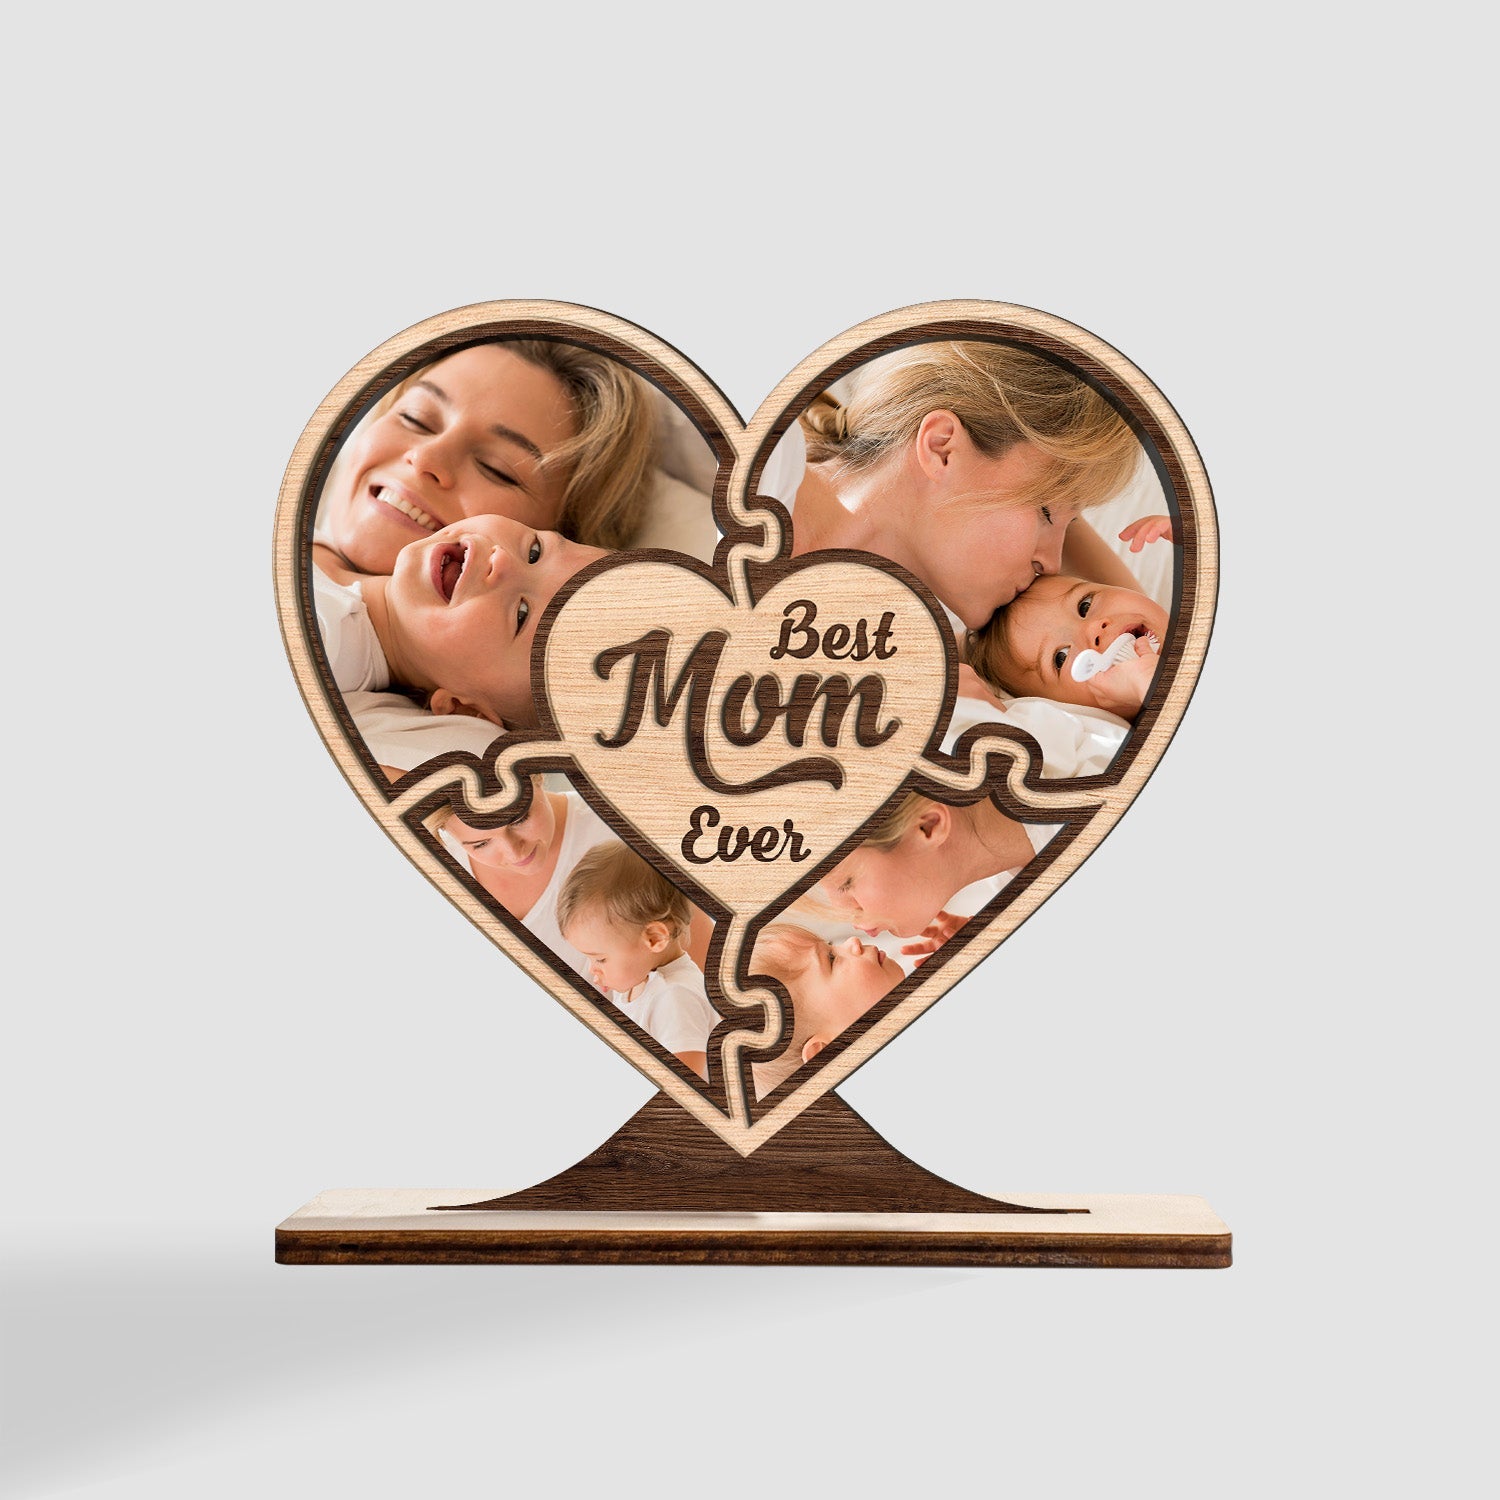 Best Mom Ever, Custom Photo Collage, Heart Shape, Wooden Plaque 3 Layers